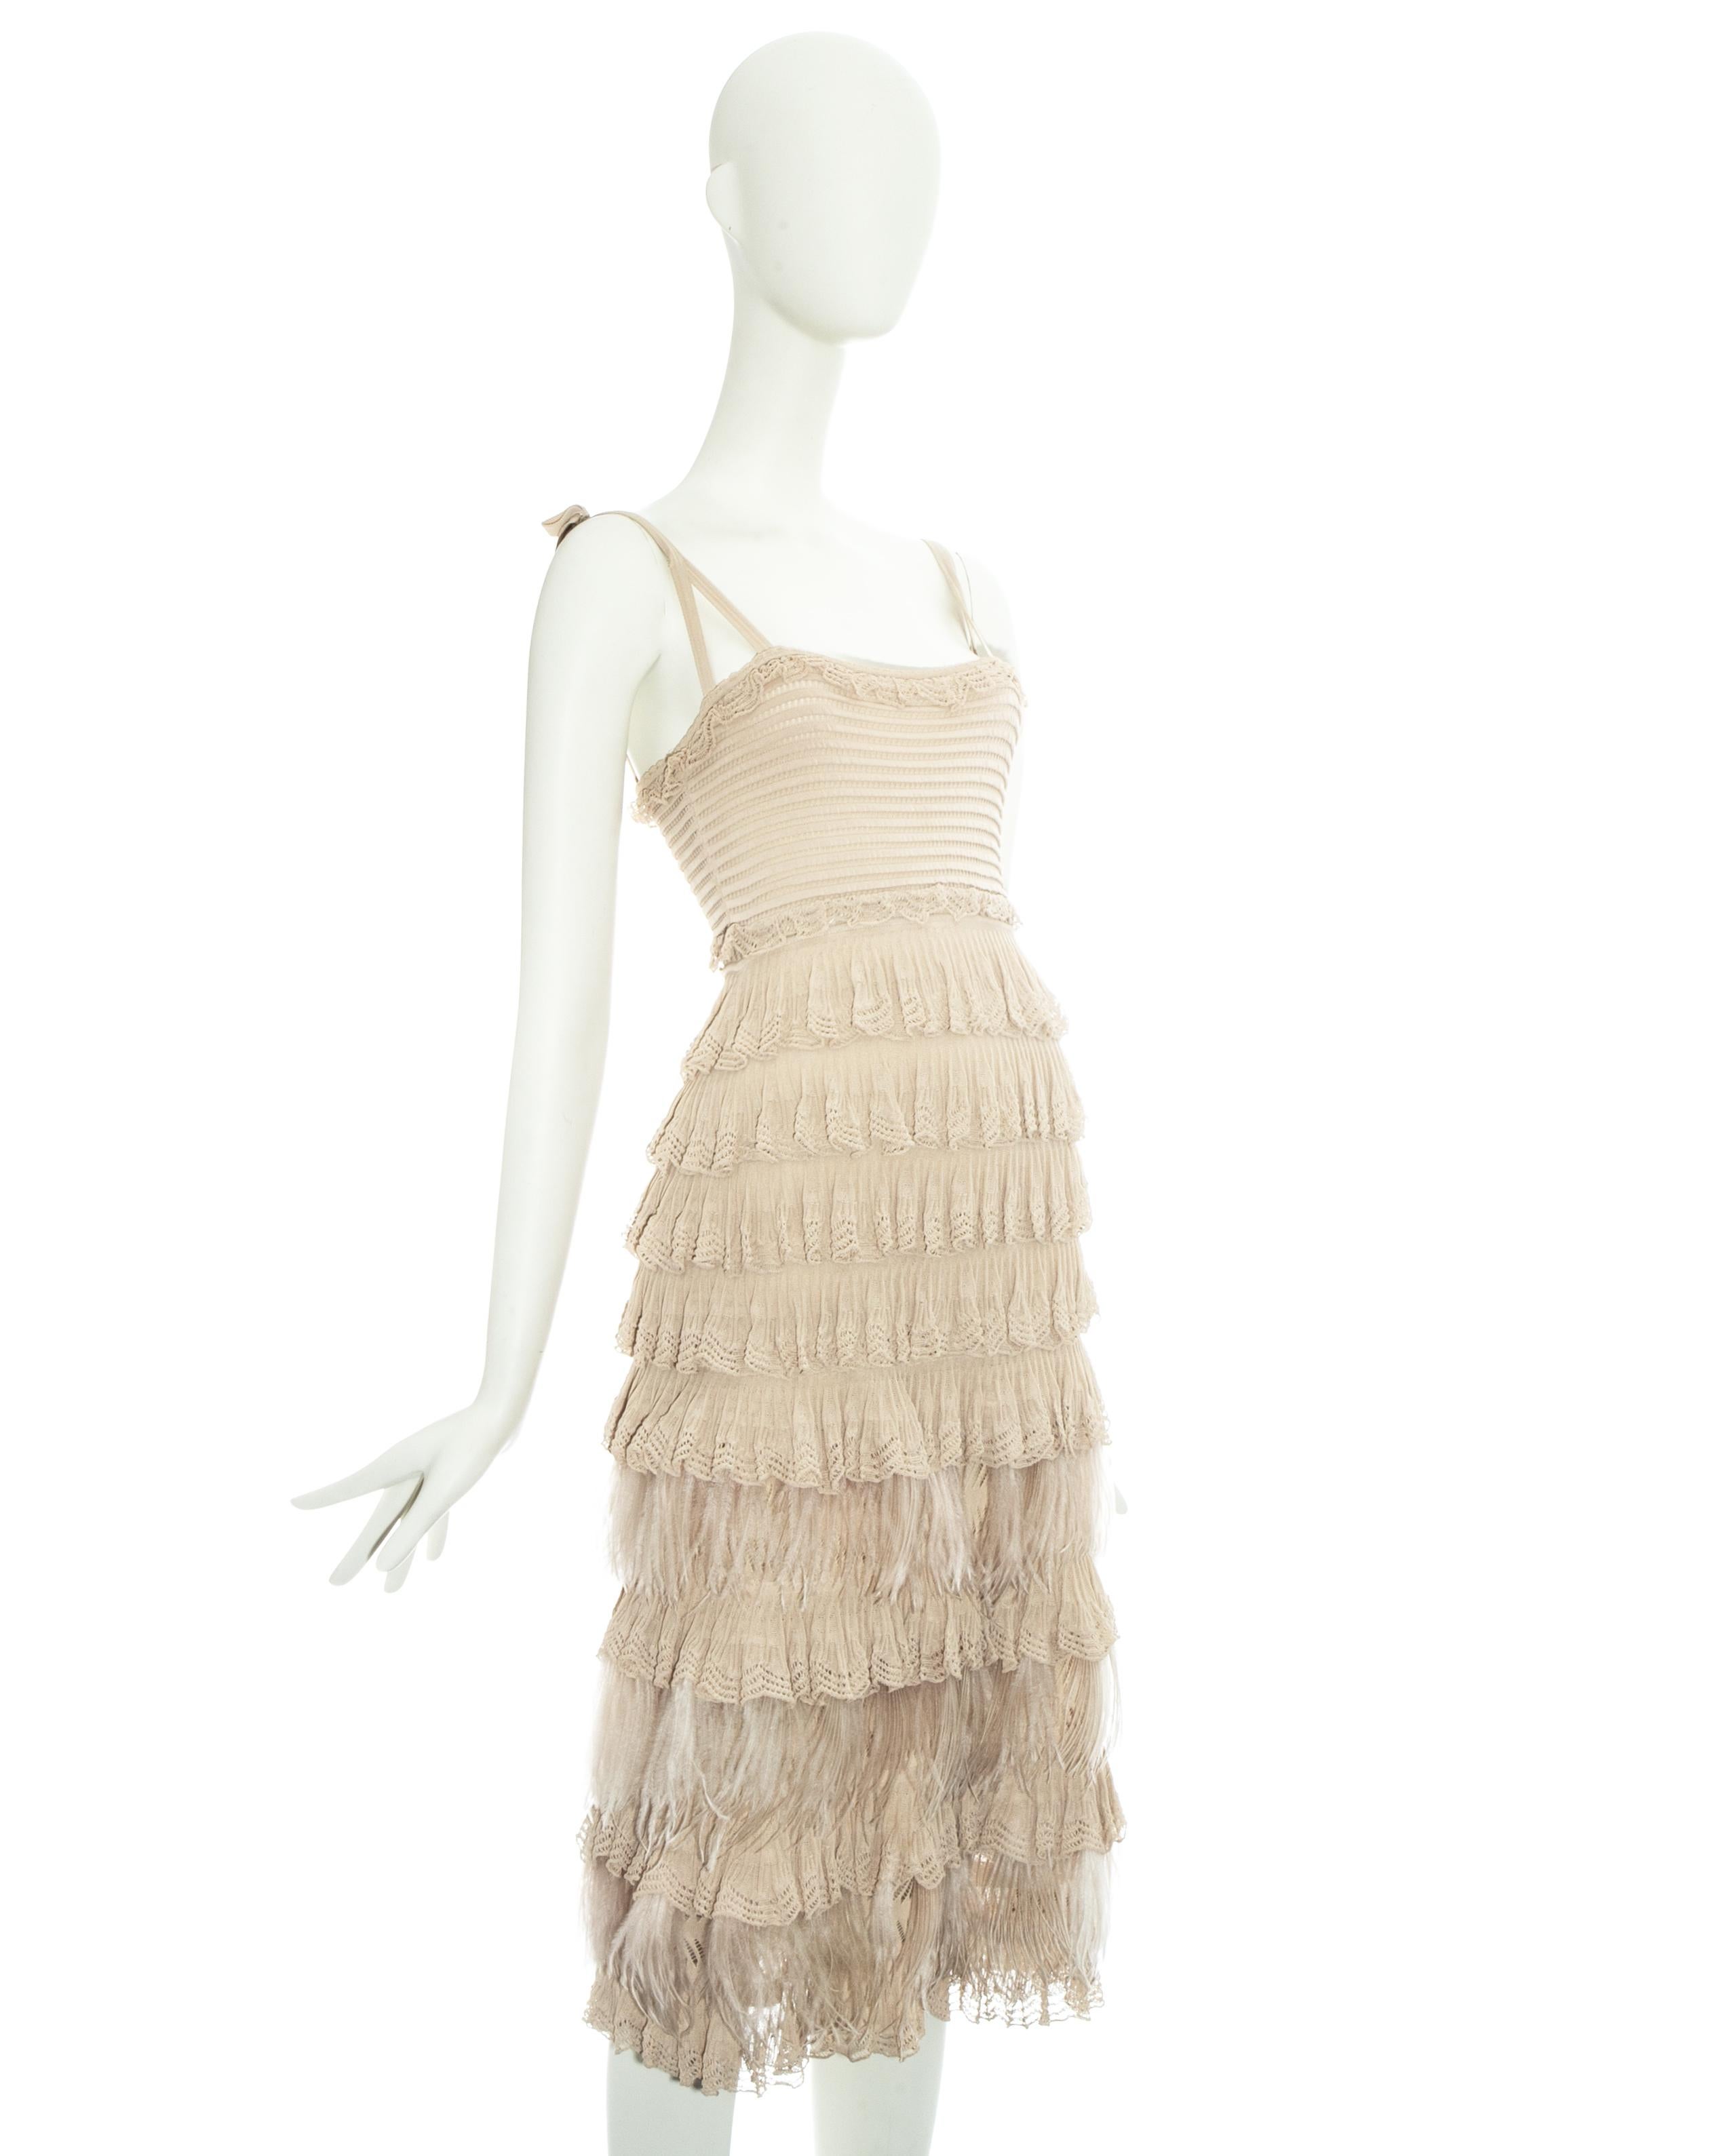 Christian Dior by John Galliano beige knitted dress with ruffled skirt and ostrich feathers

Fall-Winter 2011